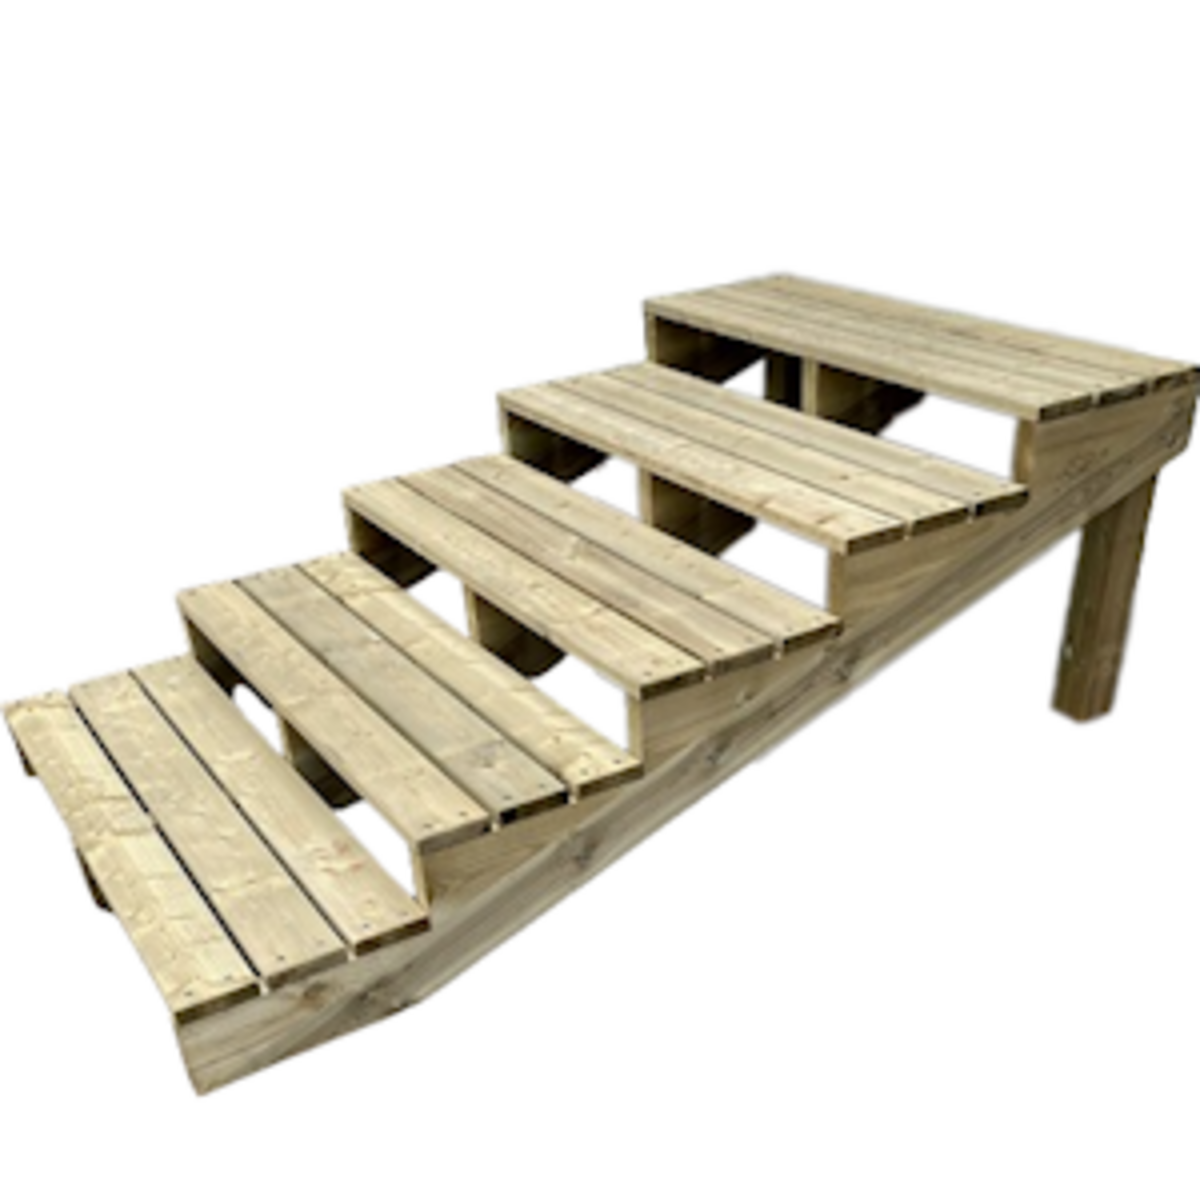 XL outdoor staircase wood with extra large steps 